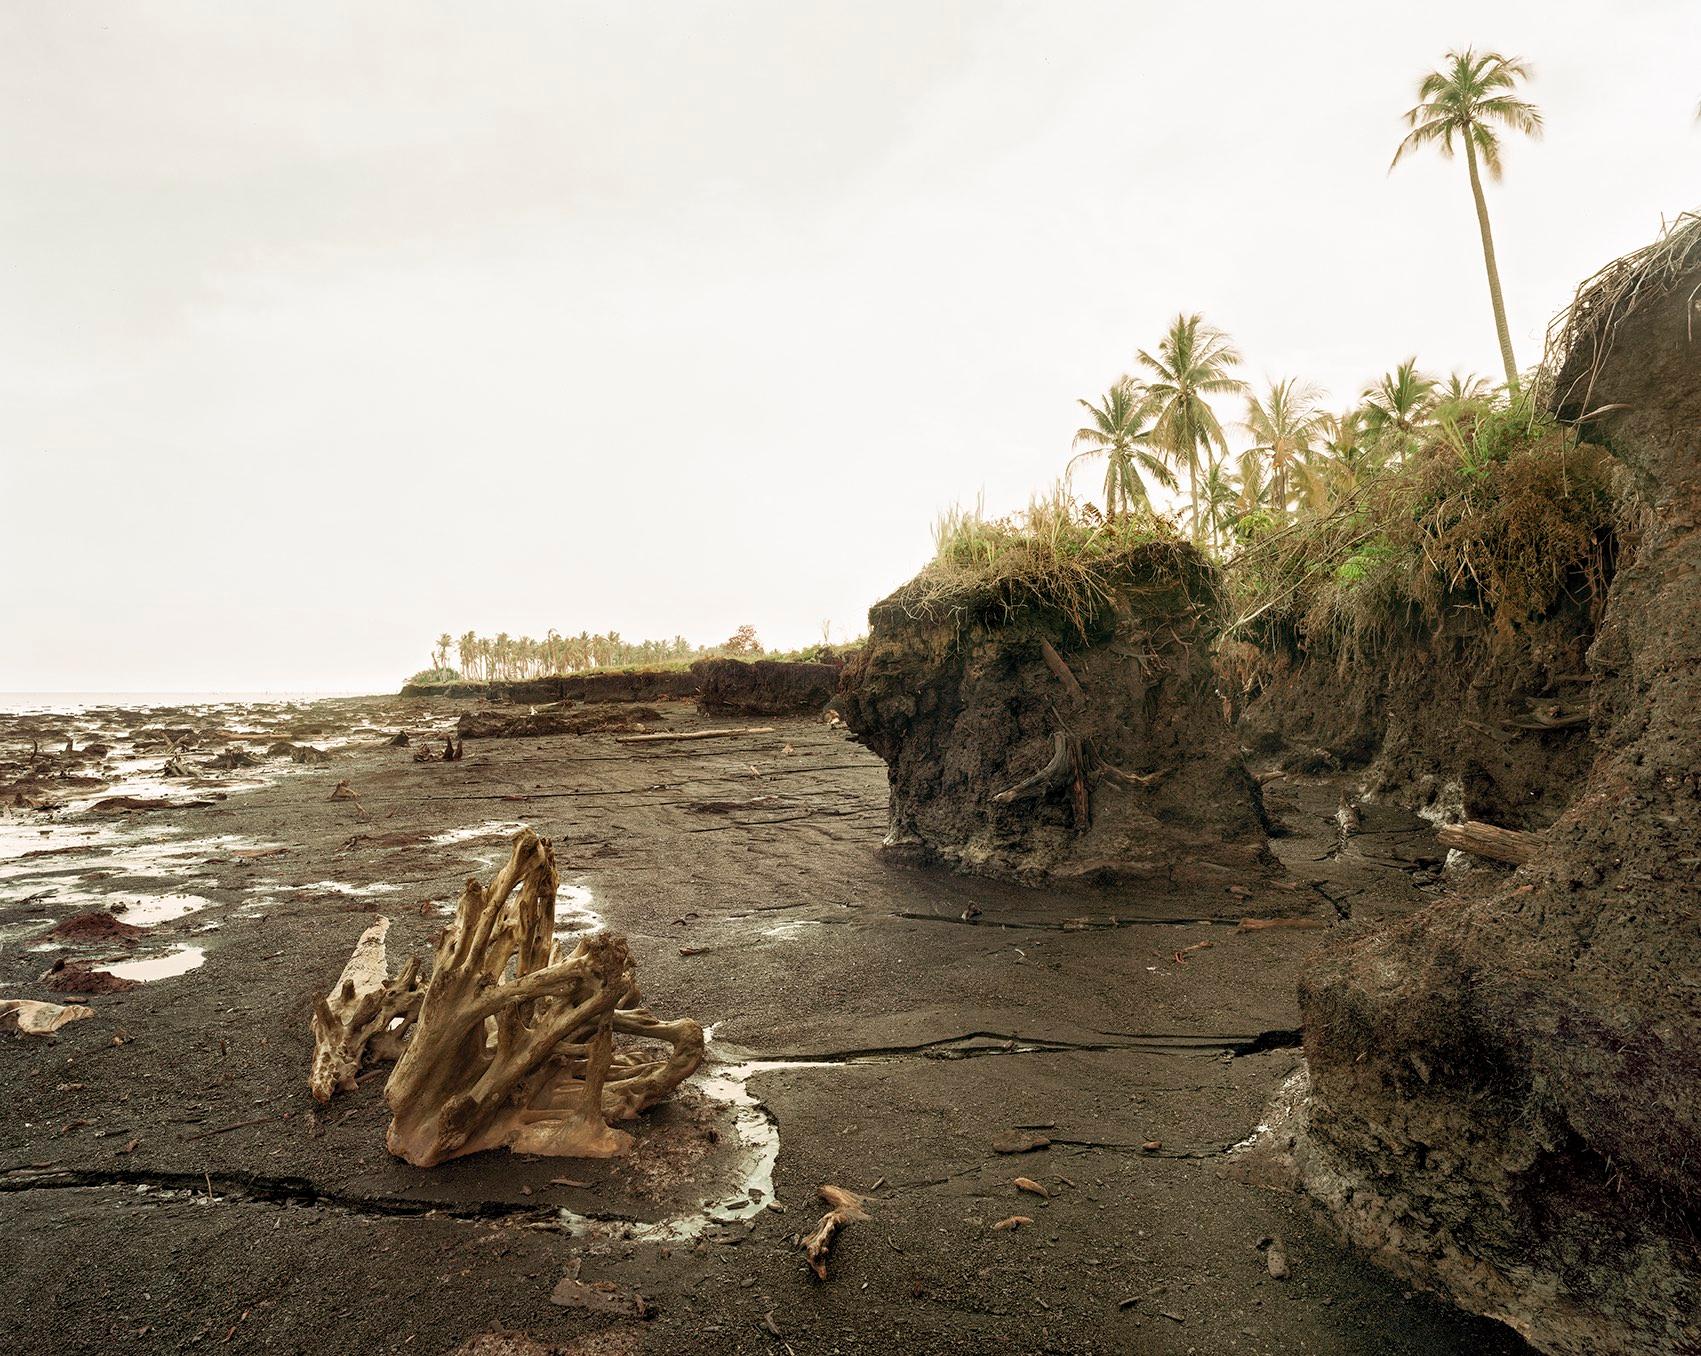 Erosion After Logging of Mangroves 6, Rangsang Island
Olaf Otto Becker
Signed on reverse
Archival pigment print

Available in three sizes:
24 3/4 x 29 1/2 inches – edition of 5
43 1/2 x 54 1/4 inches – edition of 5
58 3/4 x 71 inches – edition of